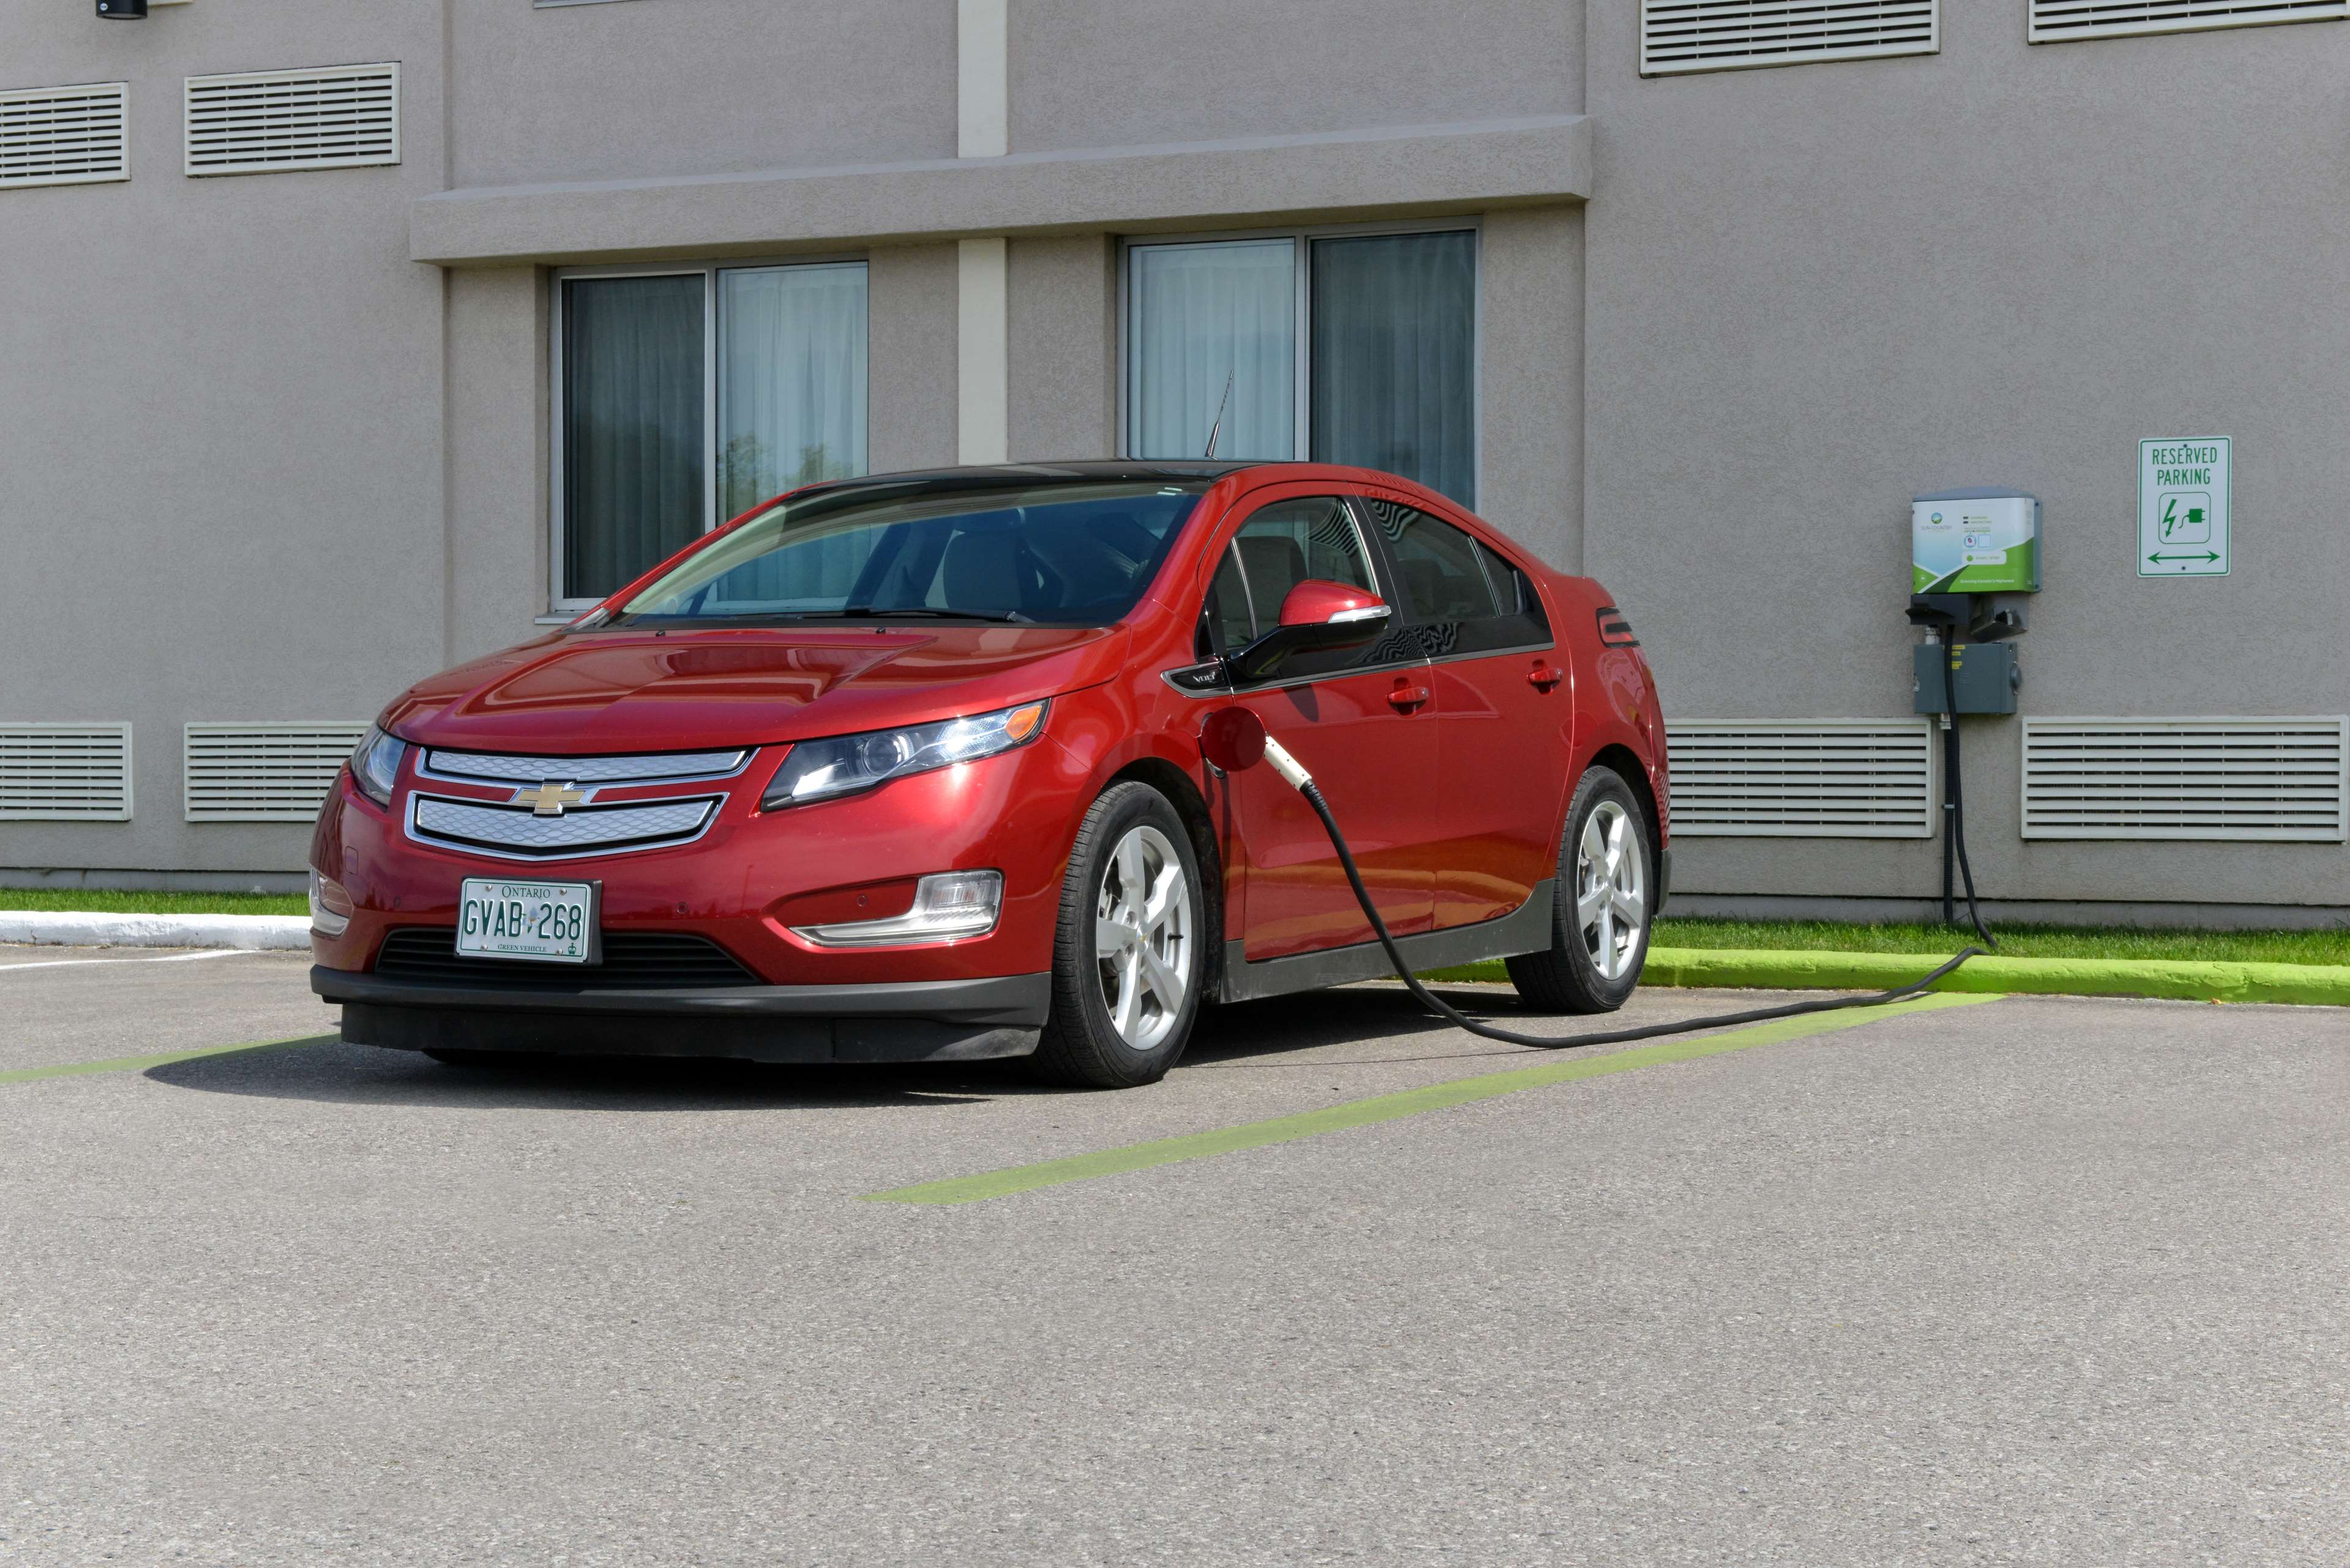 Best Western Plus Mariposa Inn & Conference Centre in Orillia: Electric Car Charging Station